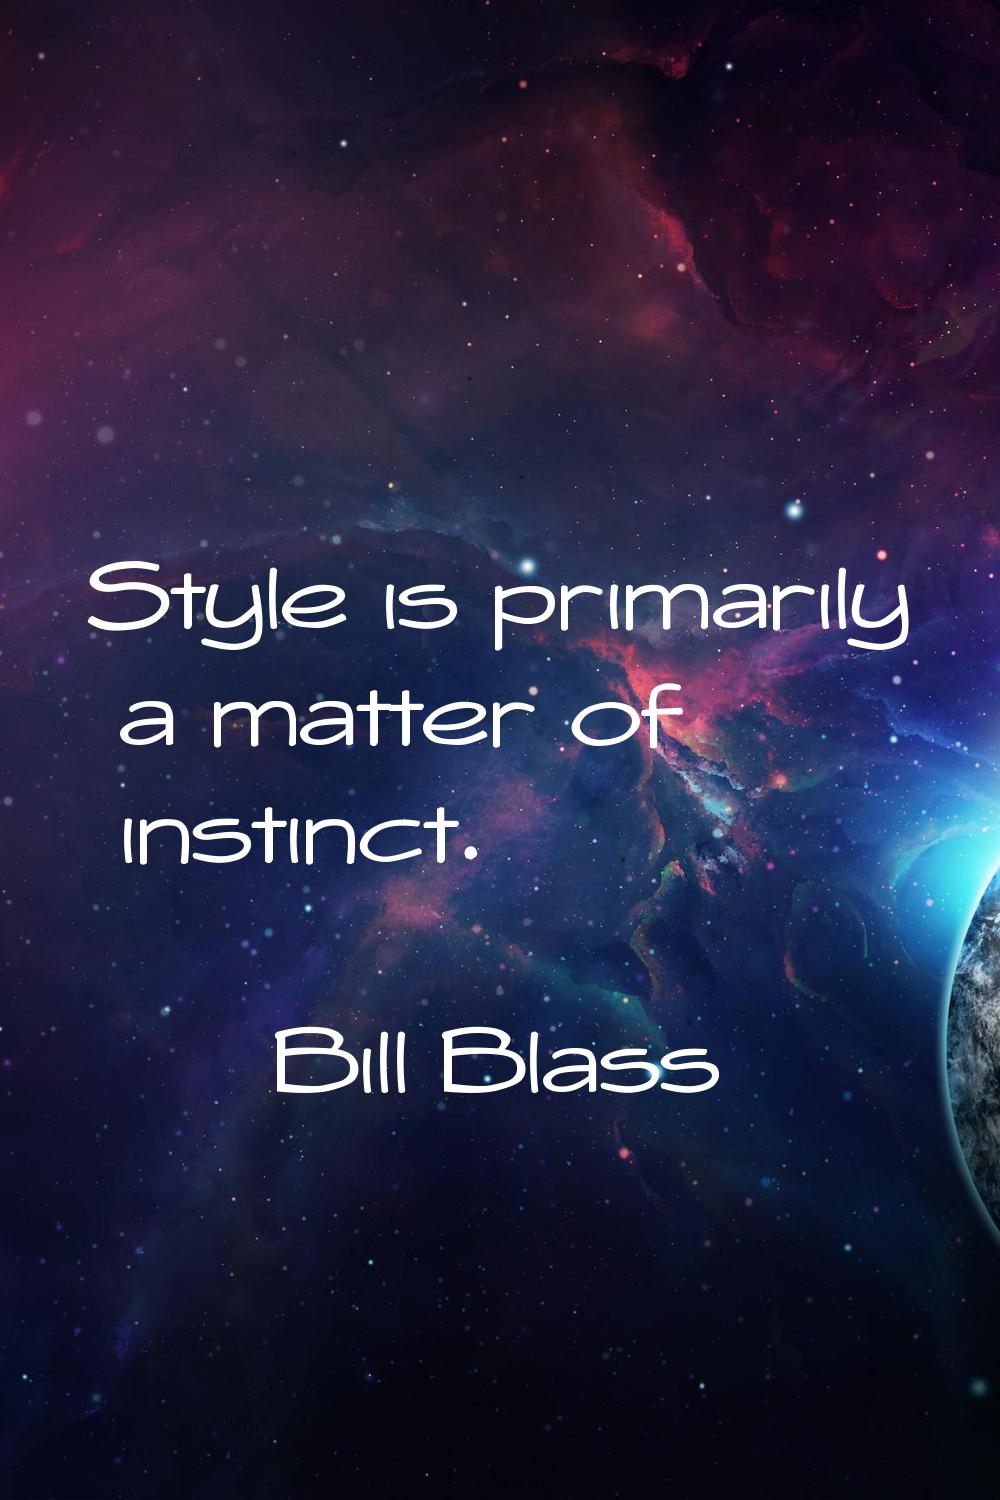 Style is primarily a matter of instinct.